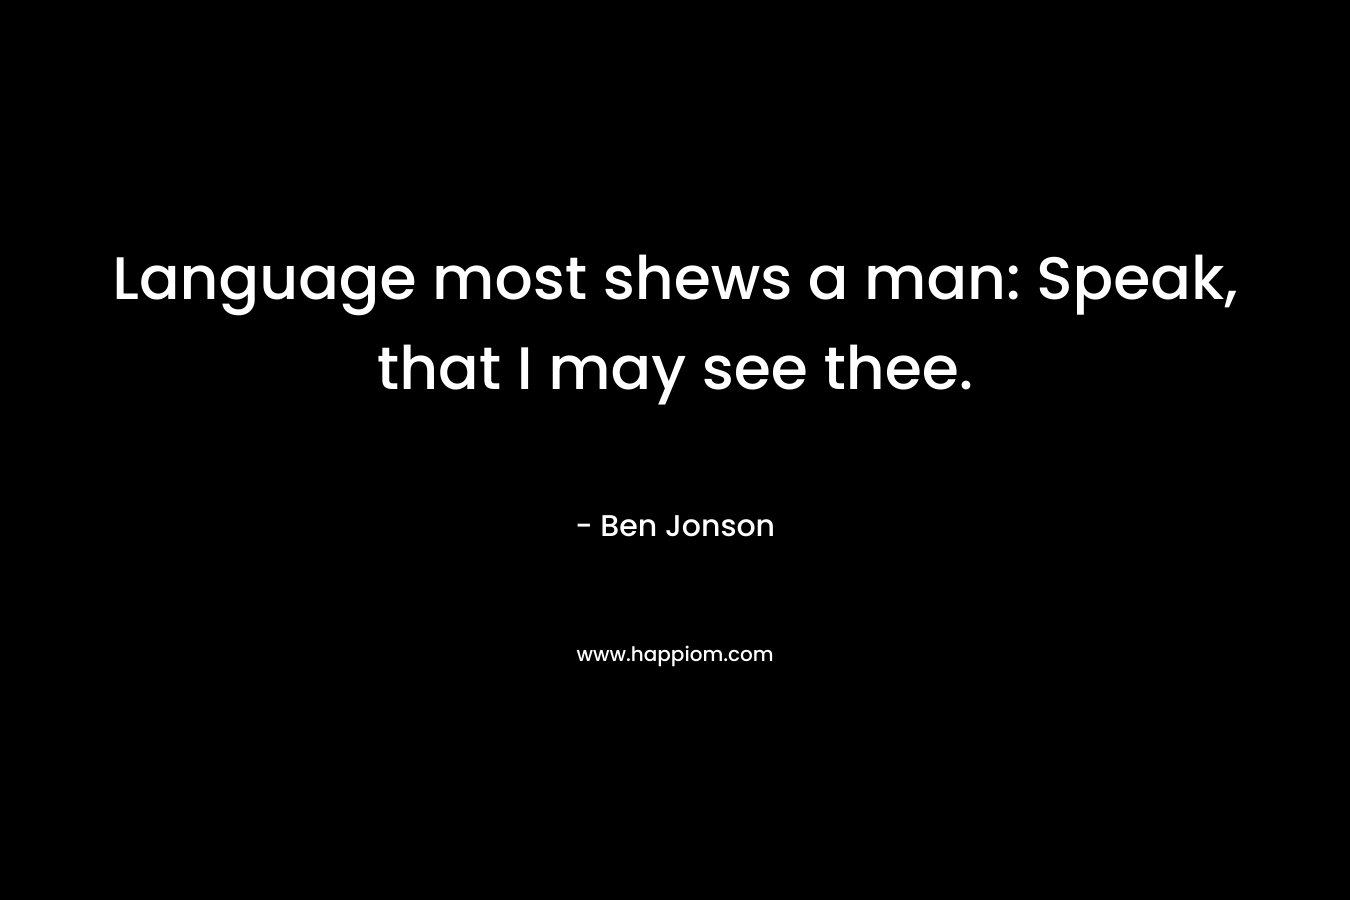 Language most shews a man: Speak, that I may see thee.